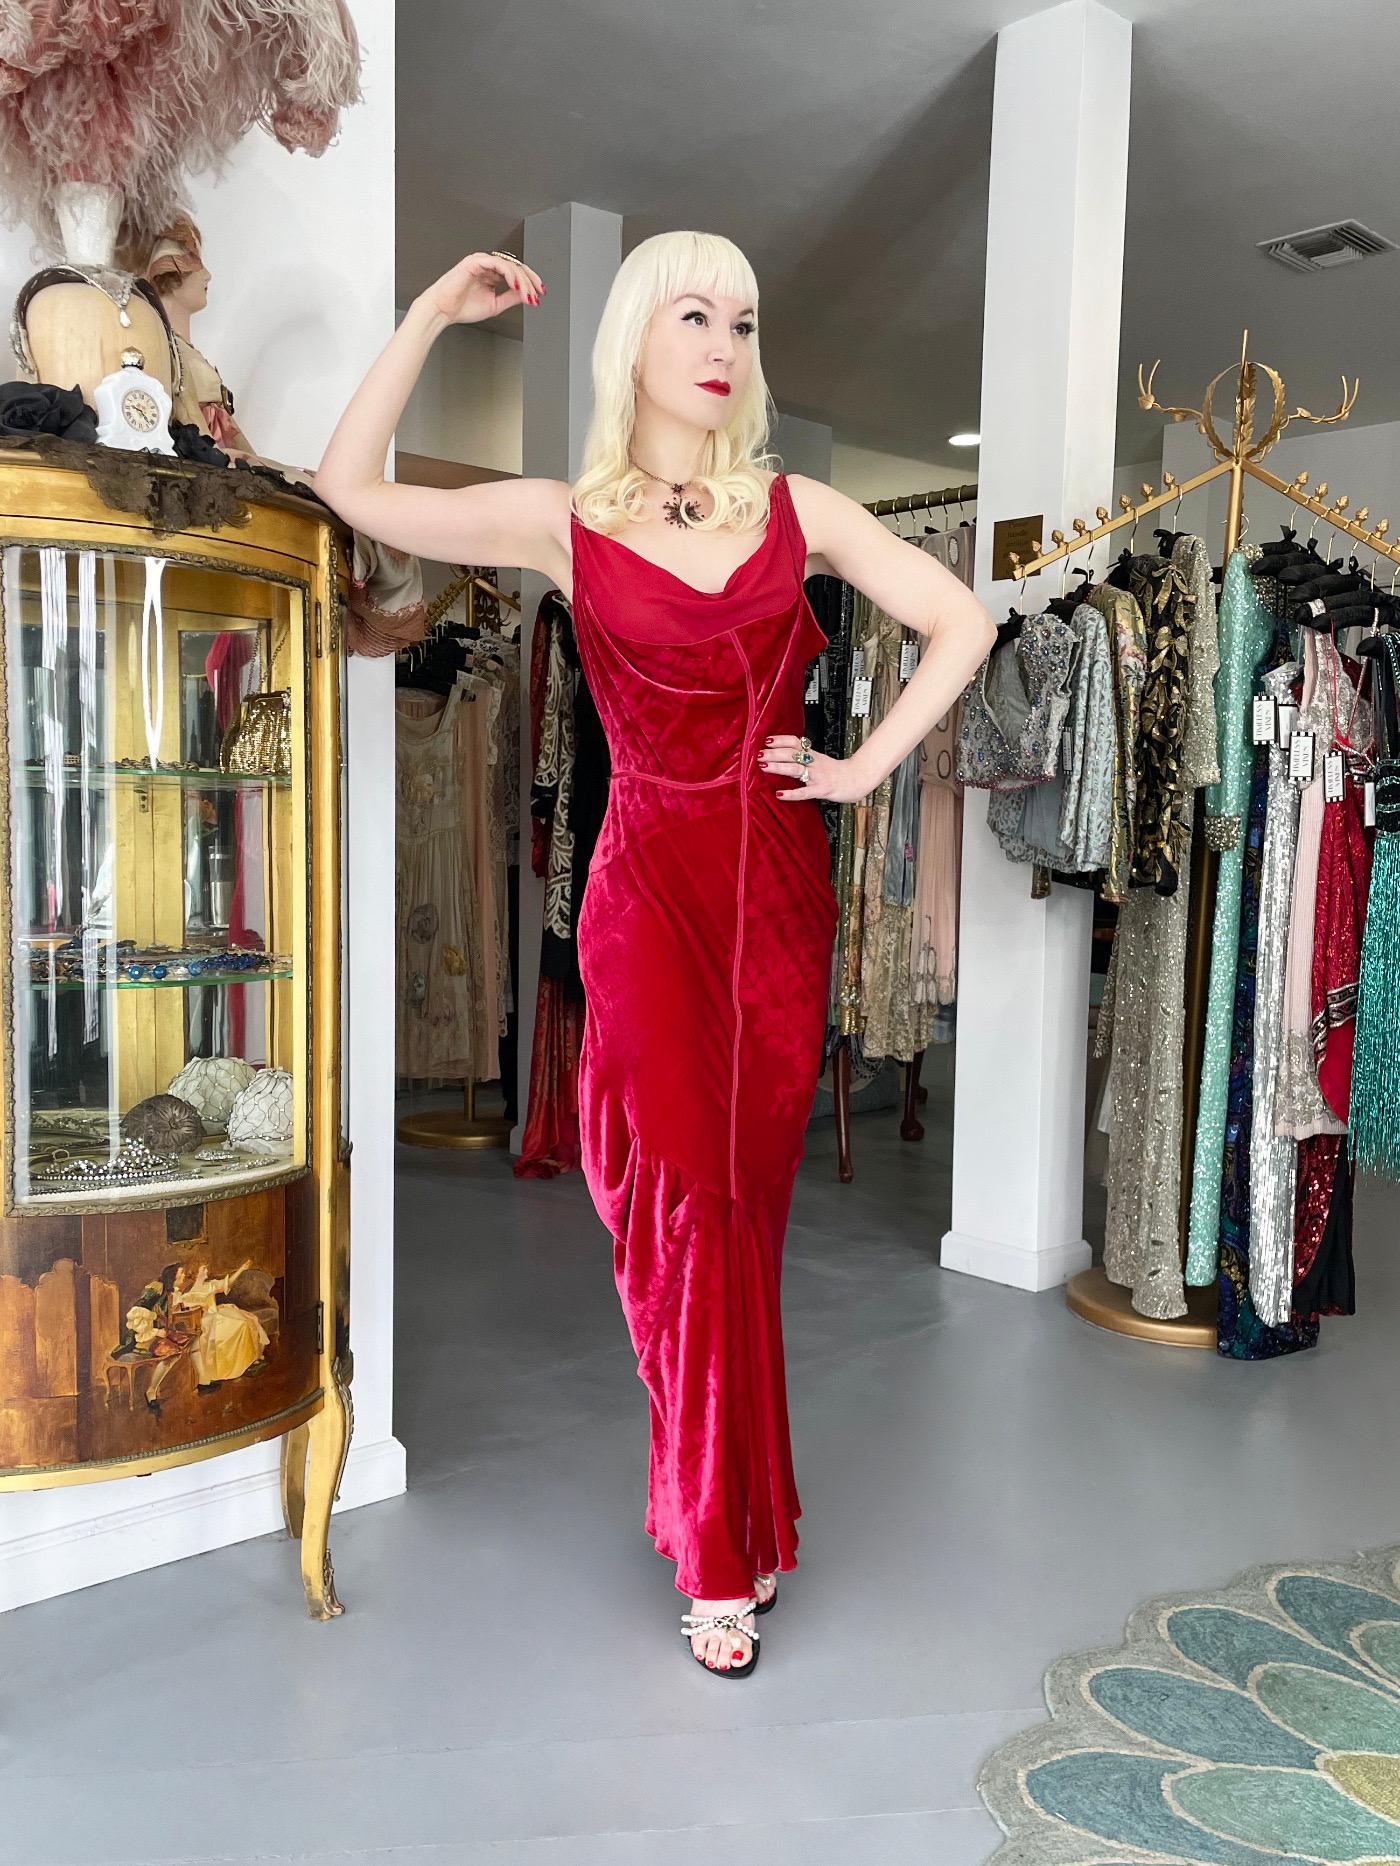 A super seductive and highly coveted Christian Dior ruby red logo patterned stretch velvet bias-cut gown dating back to John Galliano's epic 2006 fall/winter runway collection. John Galliano is widely considered one of the most innovative and